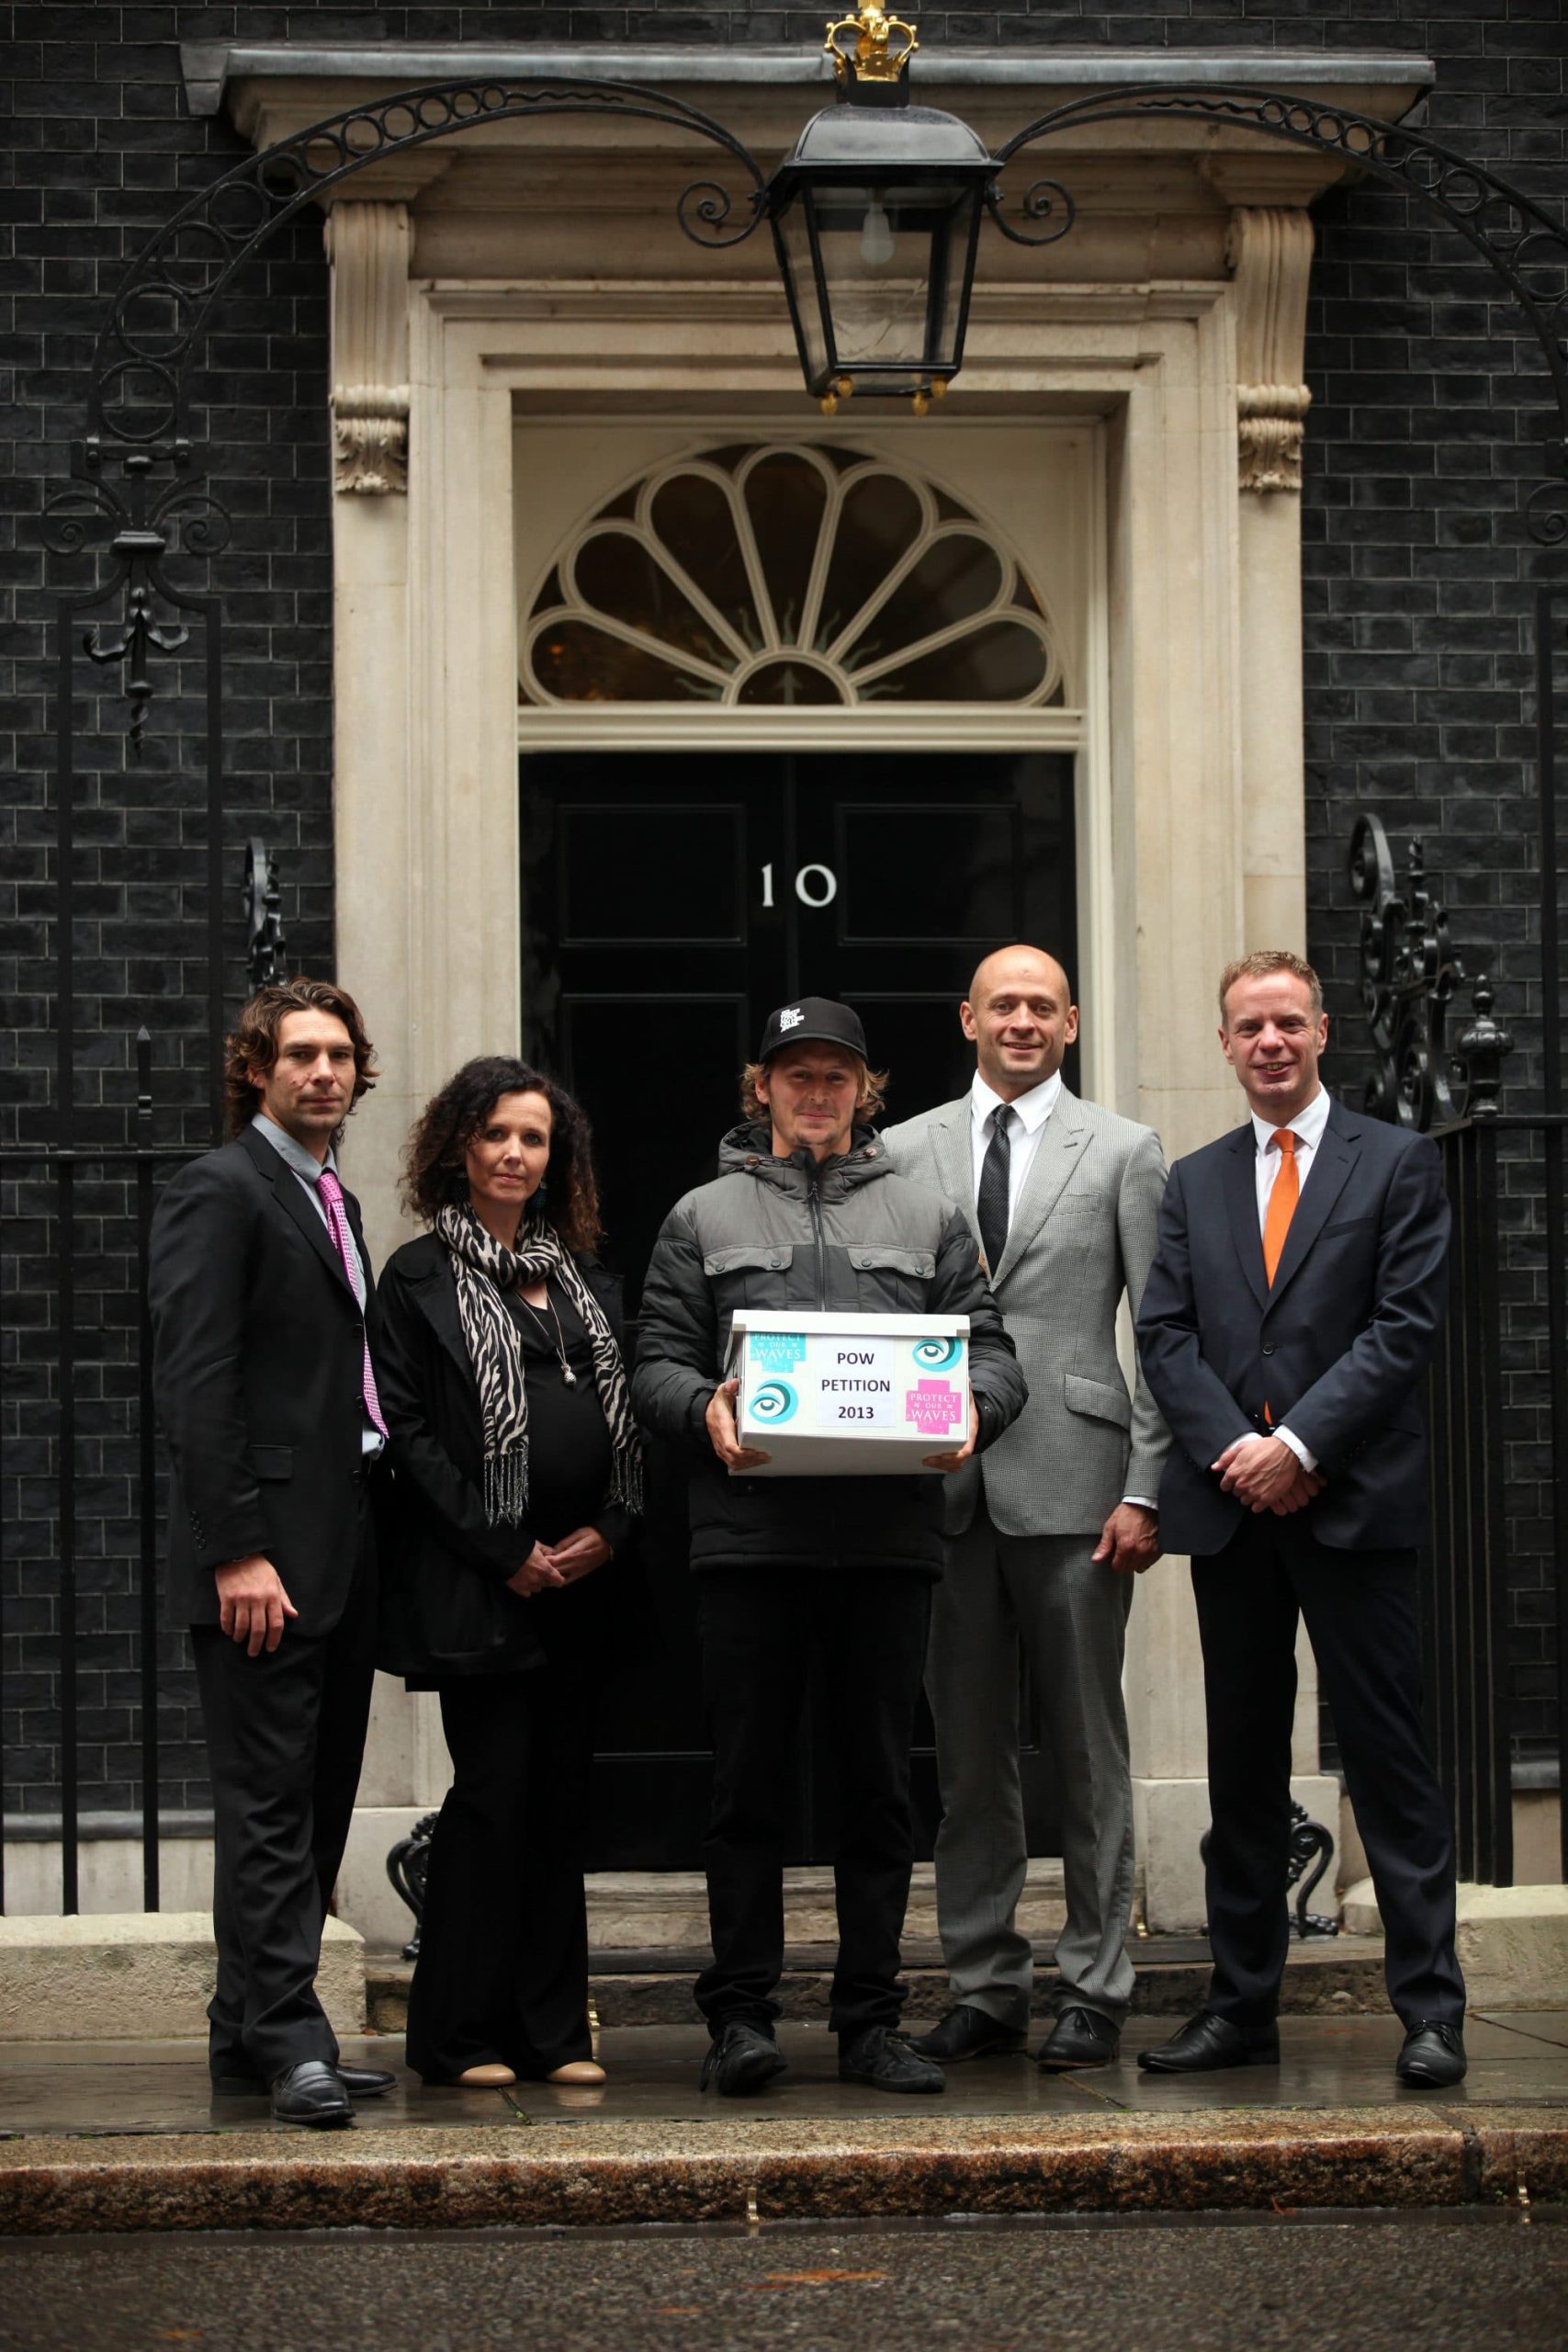 Ben Howard delivers the Protect Our Petition to No 10 Downing Street alongside SAS campaigners.